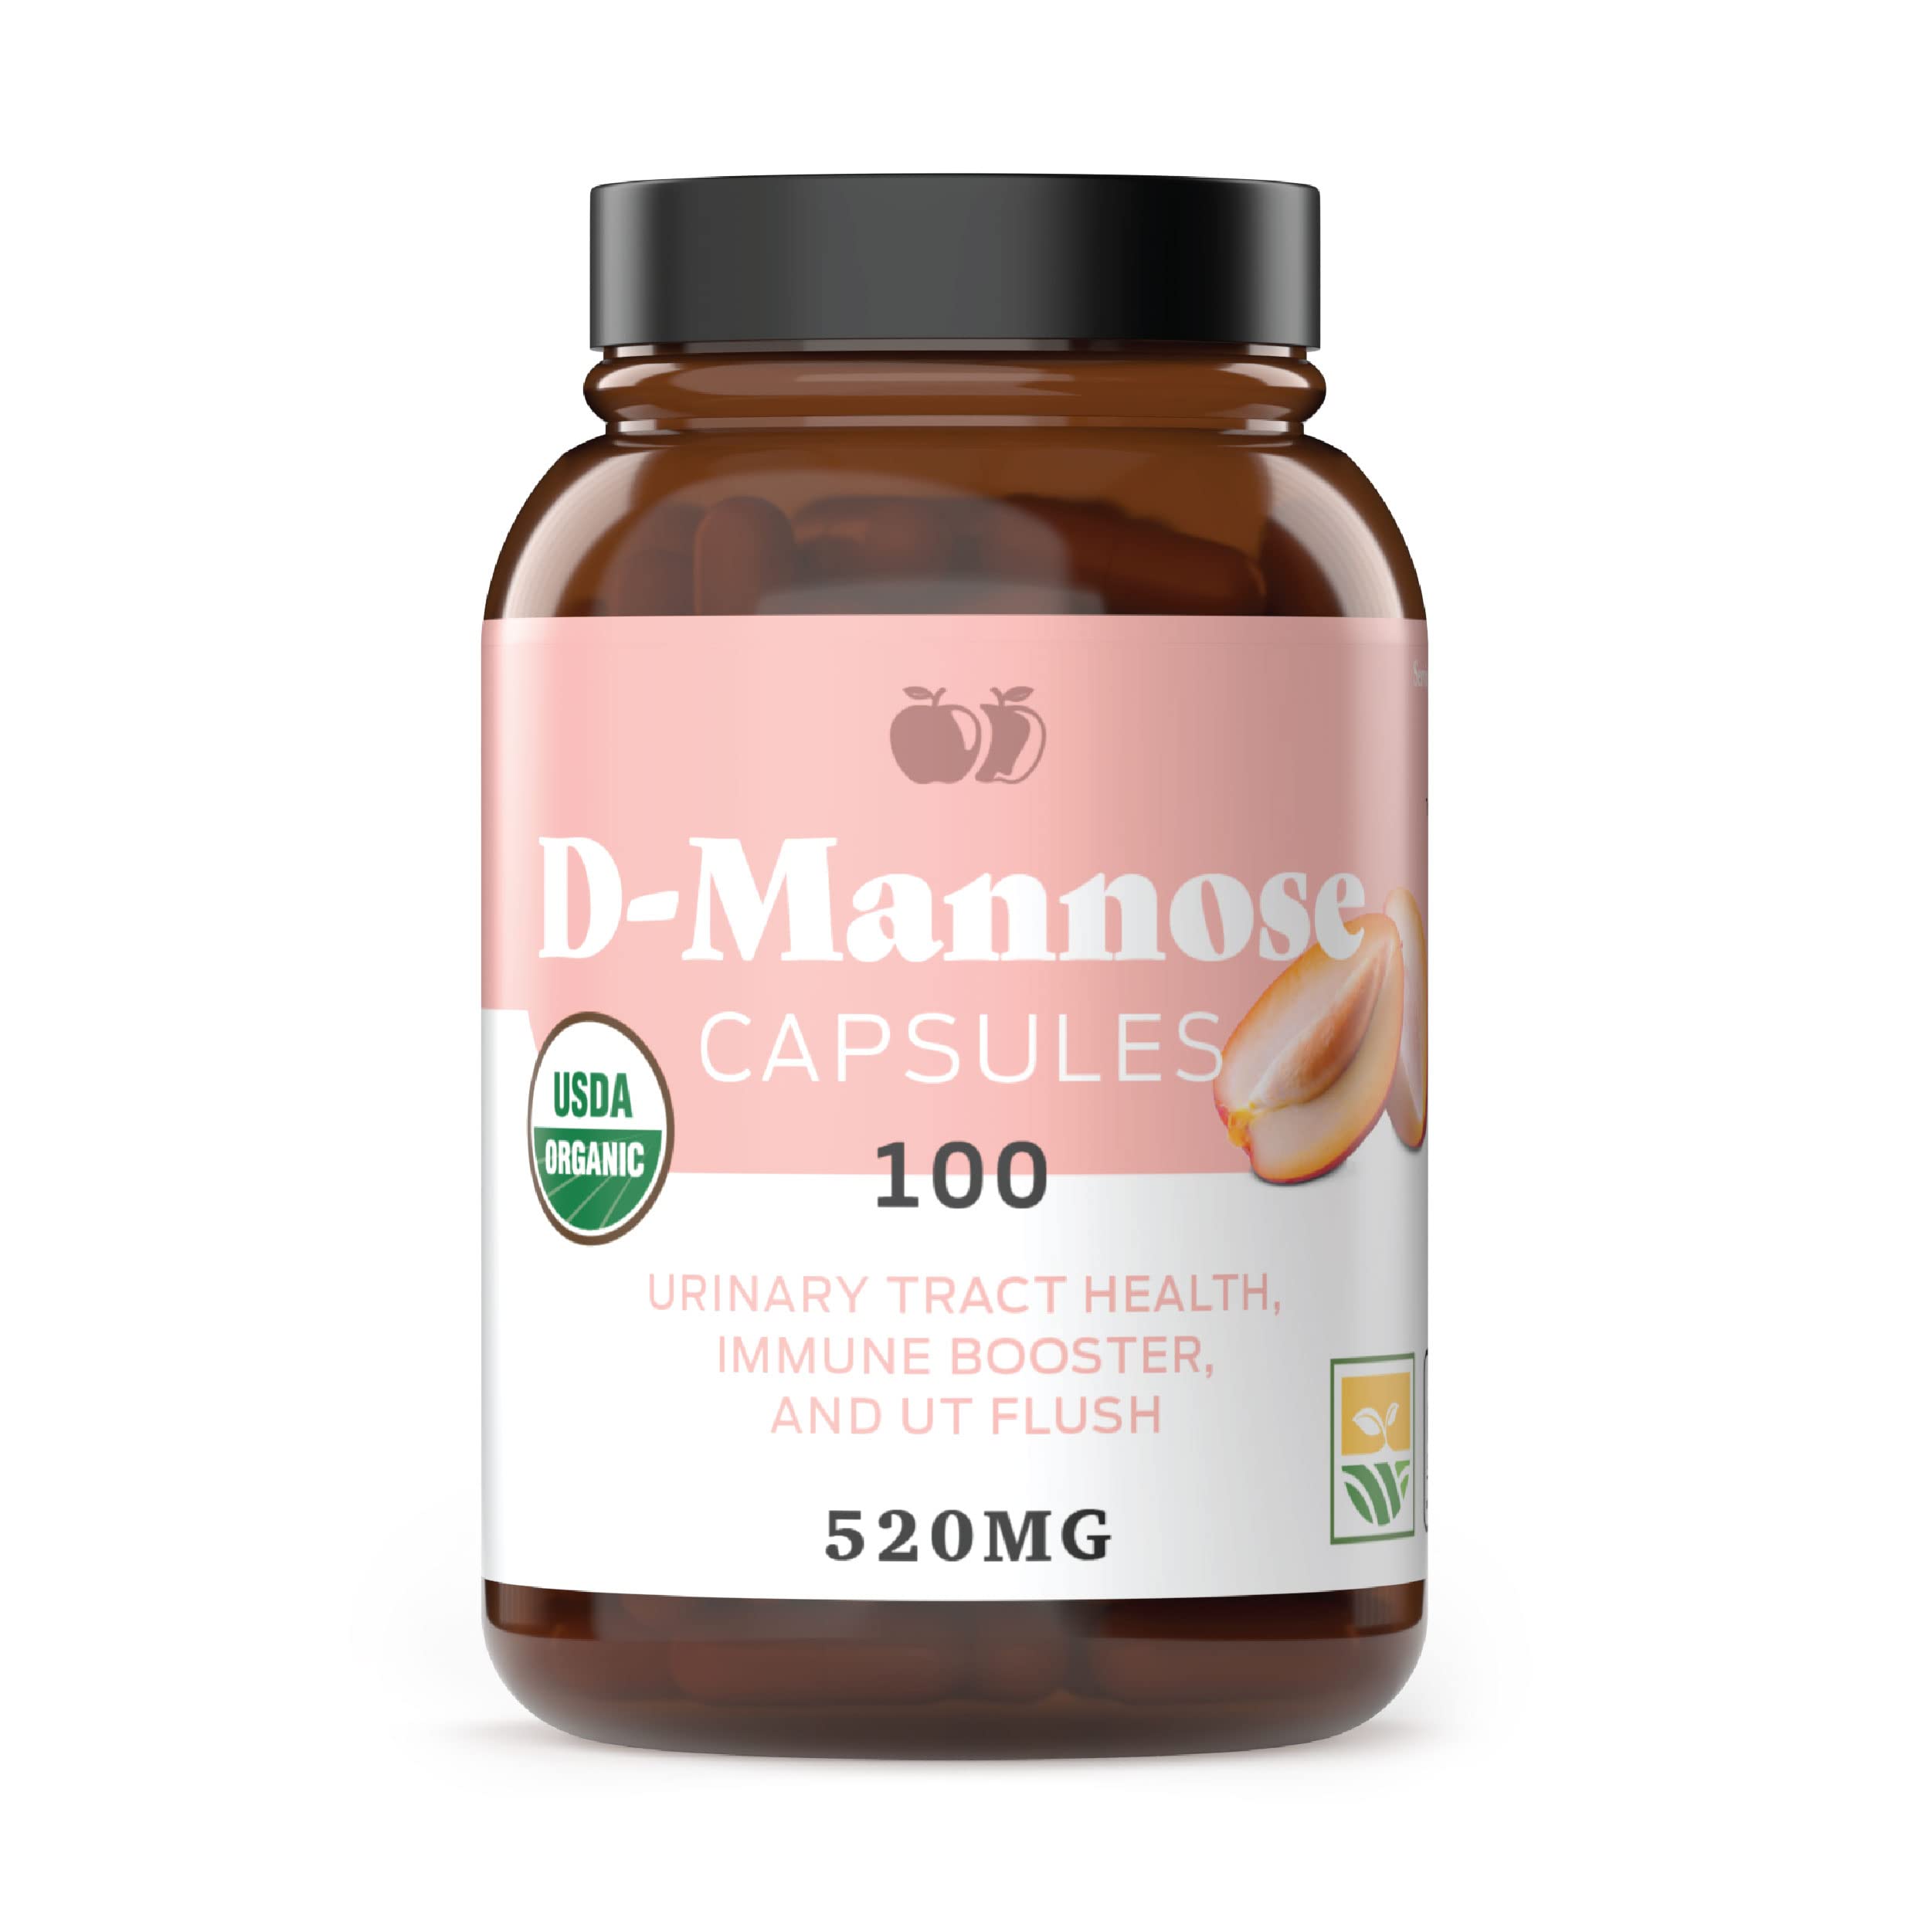 Pure UTI Relief Organic D-Mannose Capsules for Bladder & Urinary Health